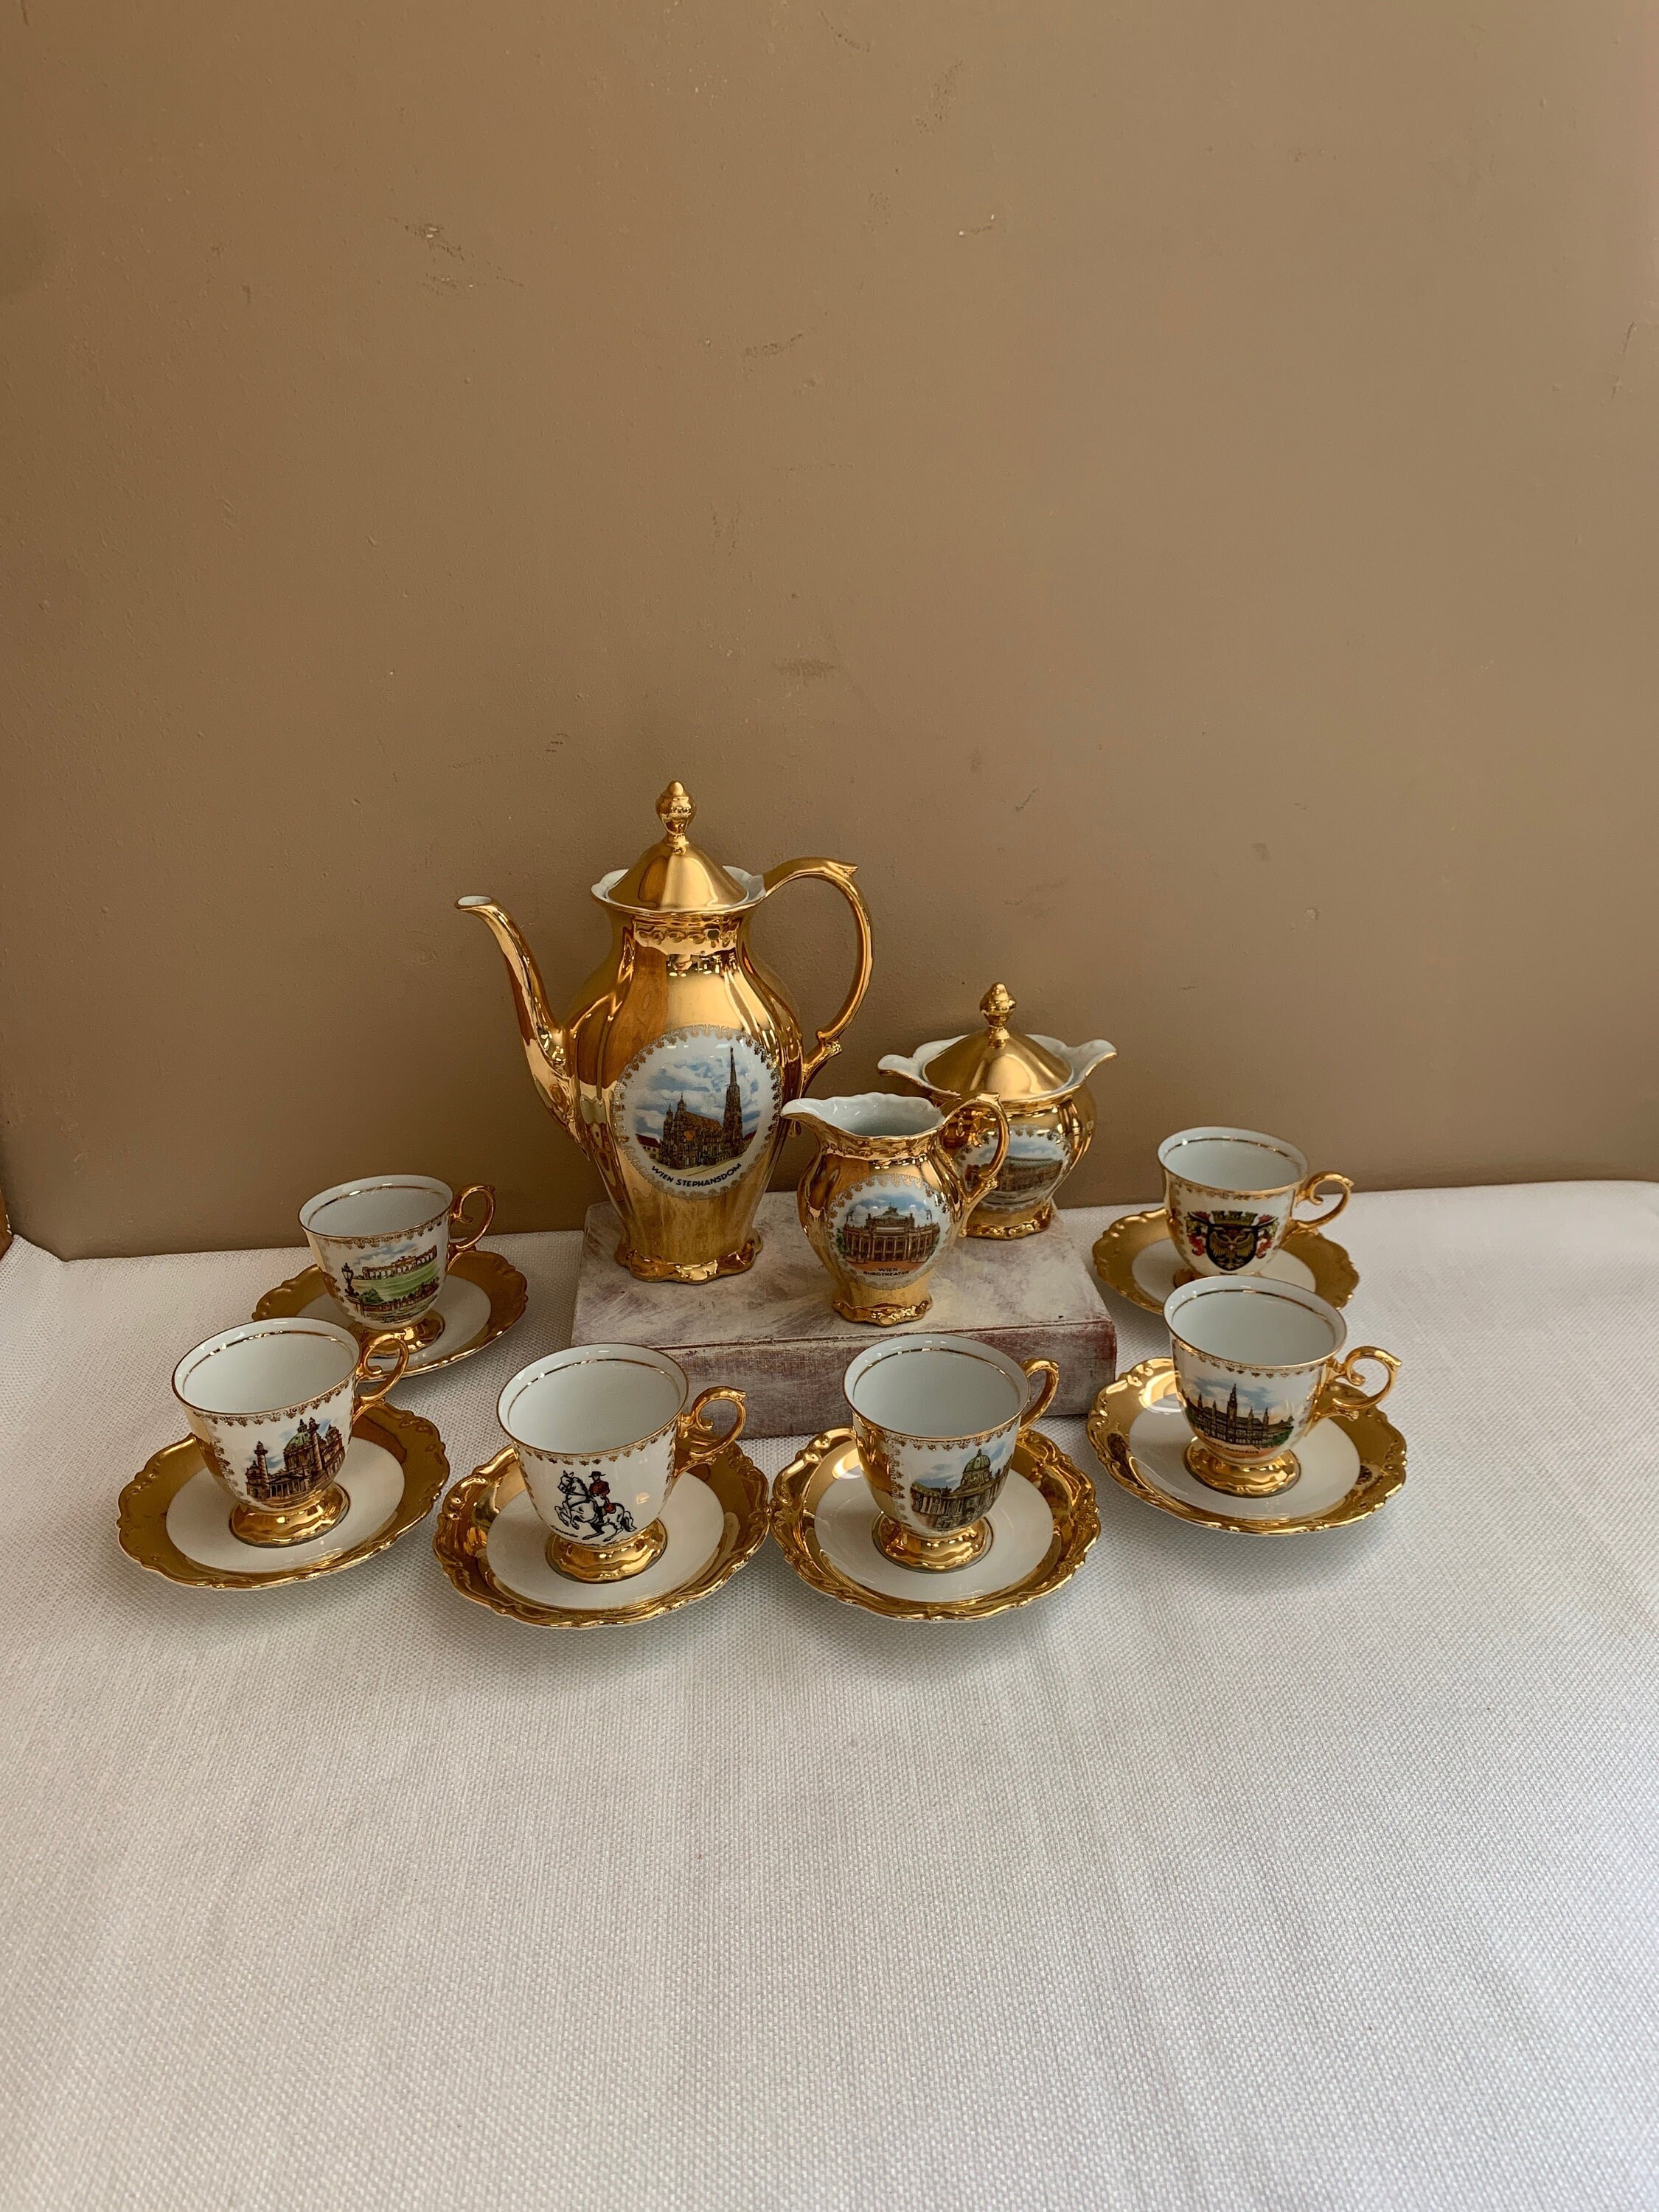 Coffee or Ceramic Porcelain Six 6, Gold Vienna Pictures Saucers, With Cups Demitasse Tea Etsy Bavarian - With Set for Vintage and Wien